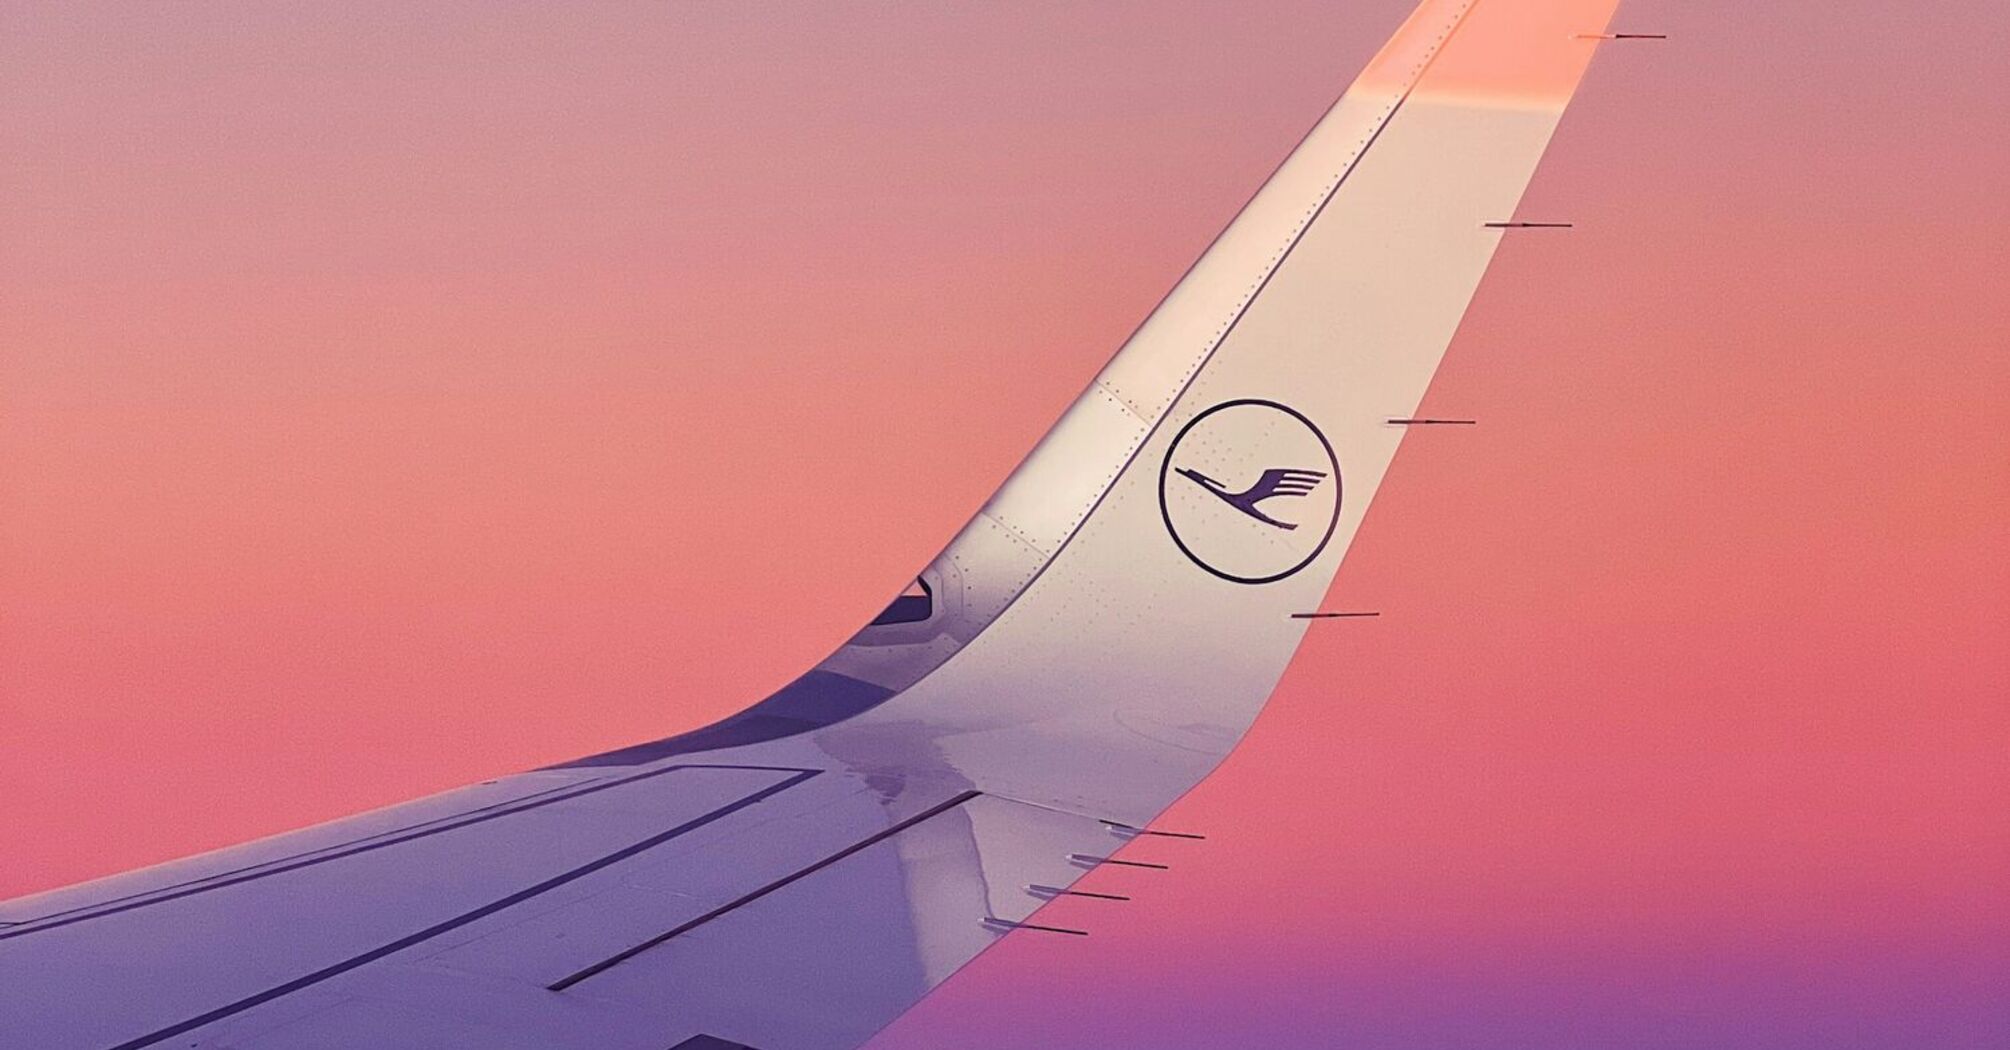 View of an airplane wing with the Lufthansa logo against a pink and purple sky